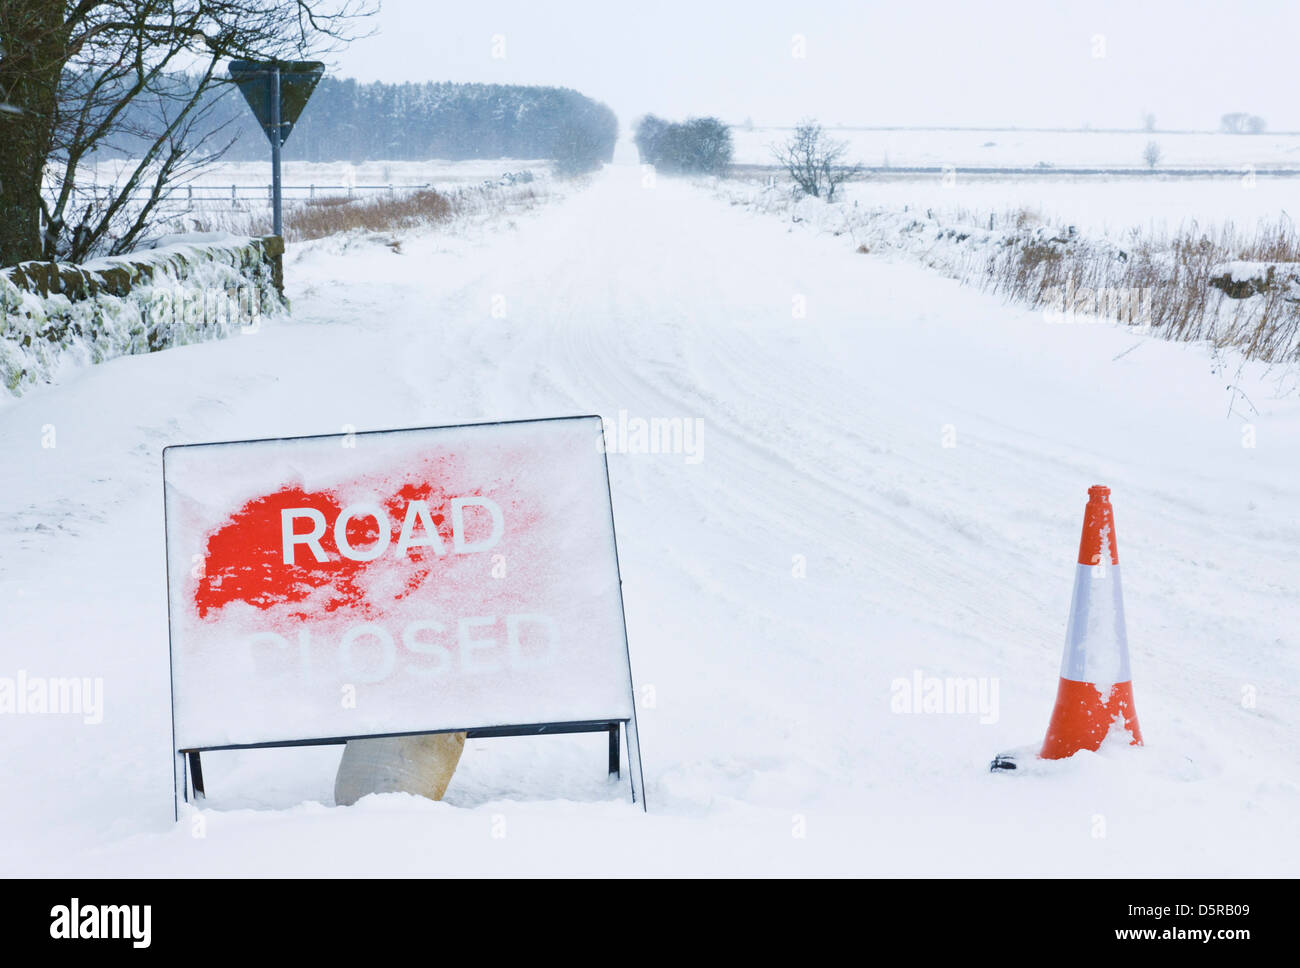 Road closed sign in snow storm, Derbyshire, Peak District National Park, England, GB, UK, EU, Europe Stock Photo